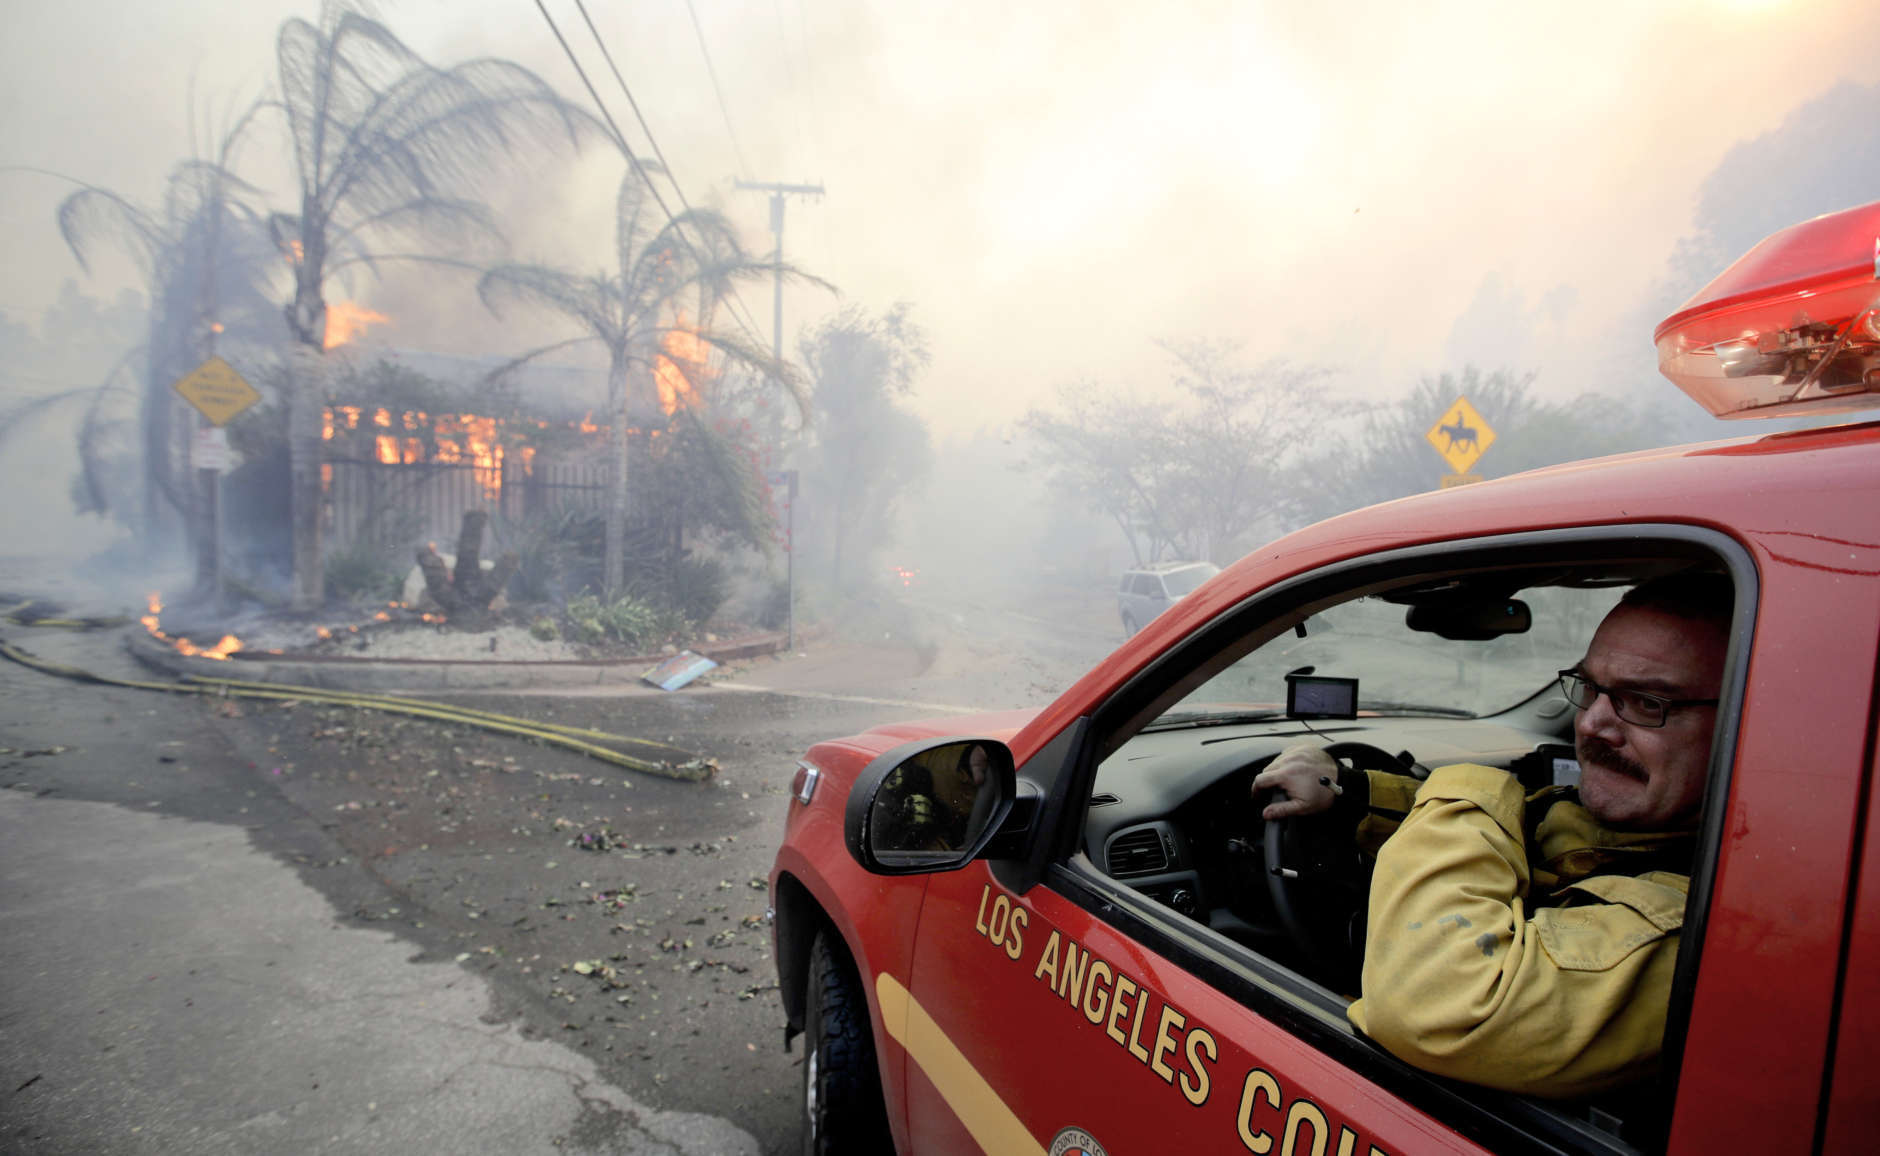 A Los Angeles County firefighter watches as structure burns during the "Creek Fire" in the Lake View Terrace area of Los Angeles, Tuesday, Dec. 5, 2017. (AP Photo/Chris Carlson)